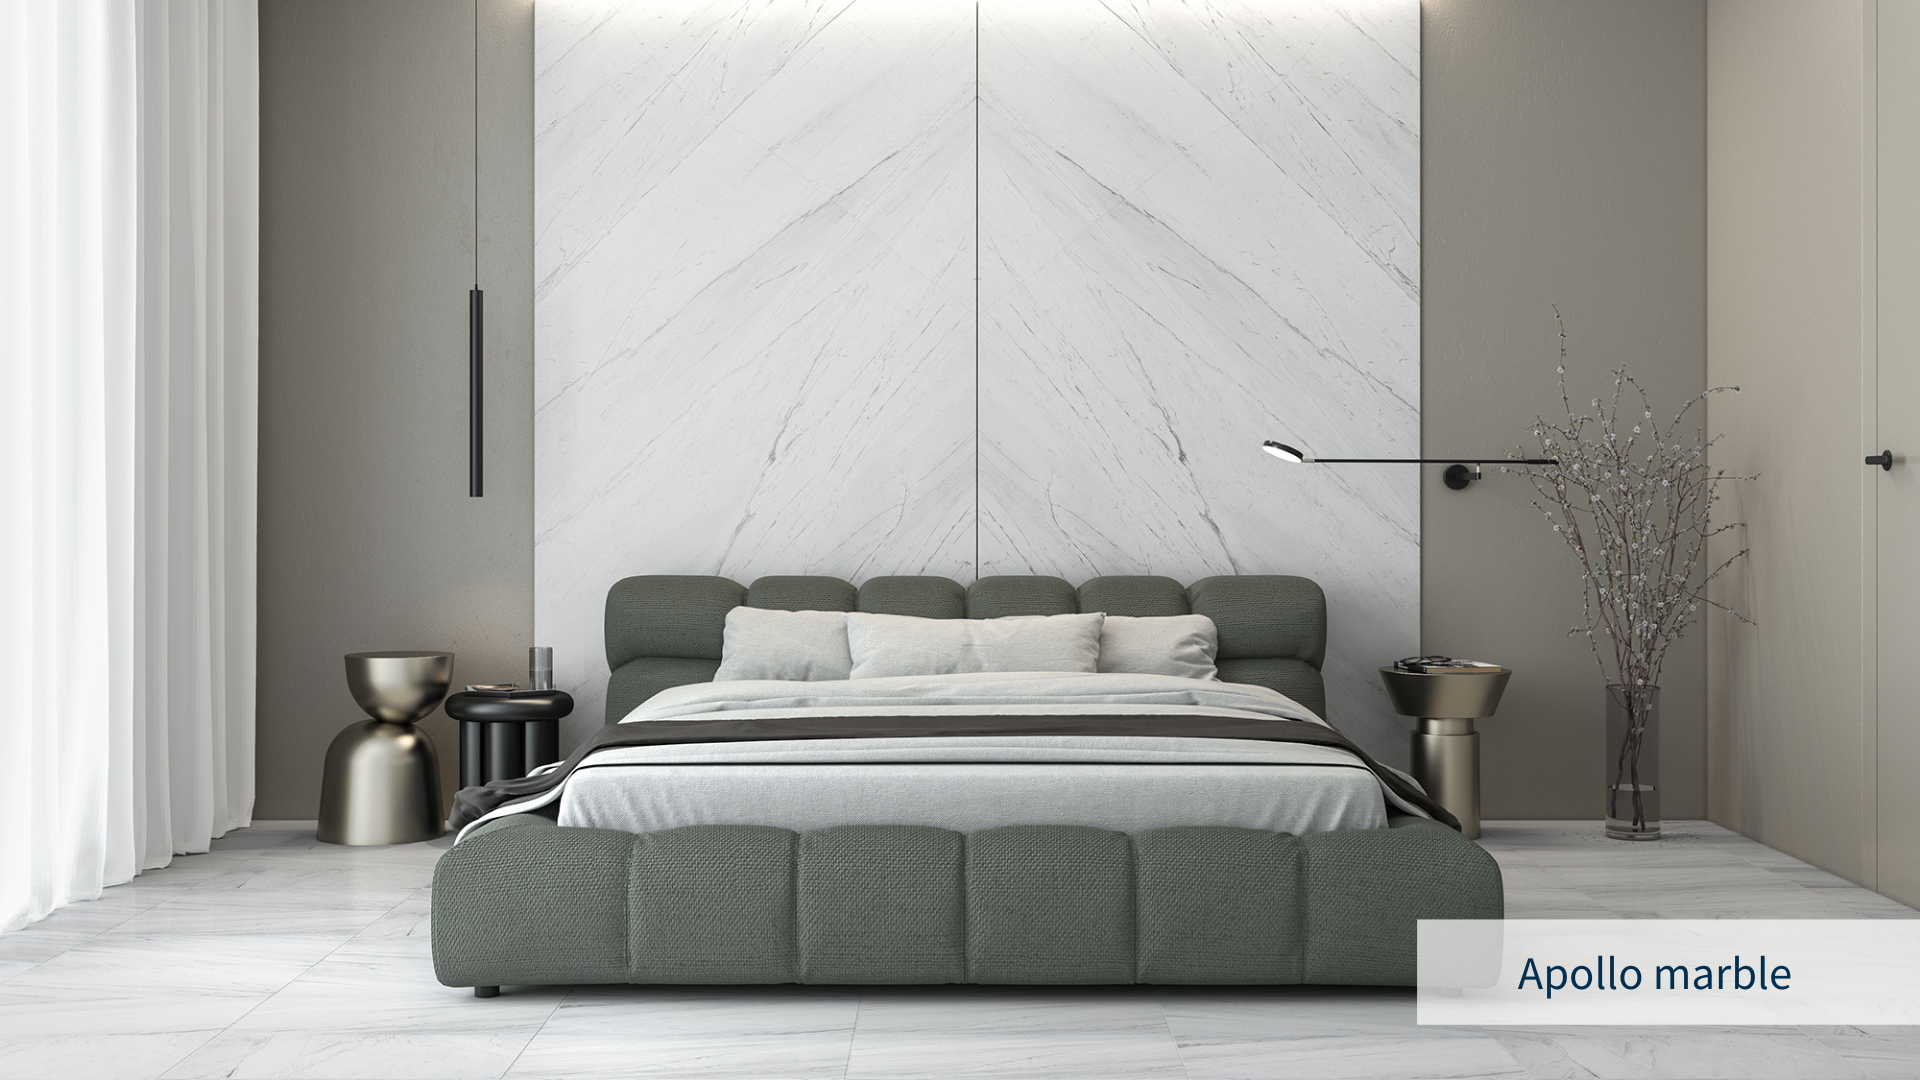 Bedroom image by Stone Group International with white marble flooring and book-match, silver elements, neutral decoration